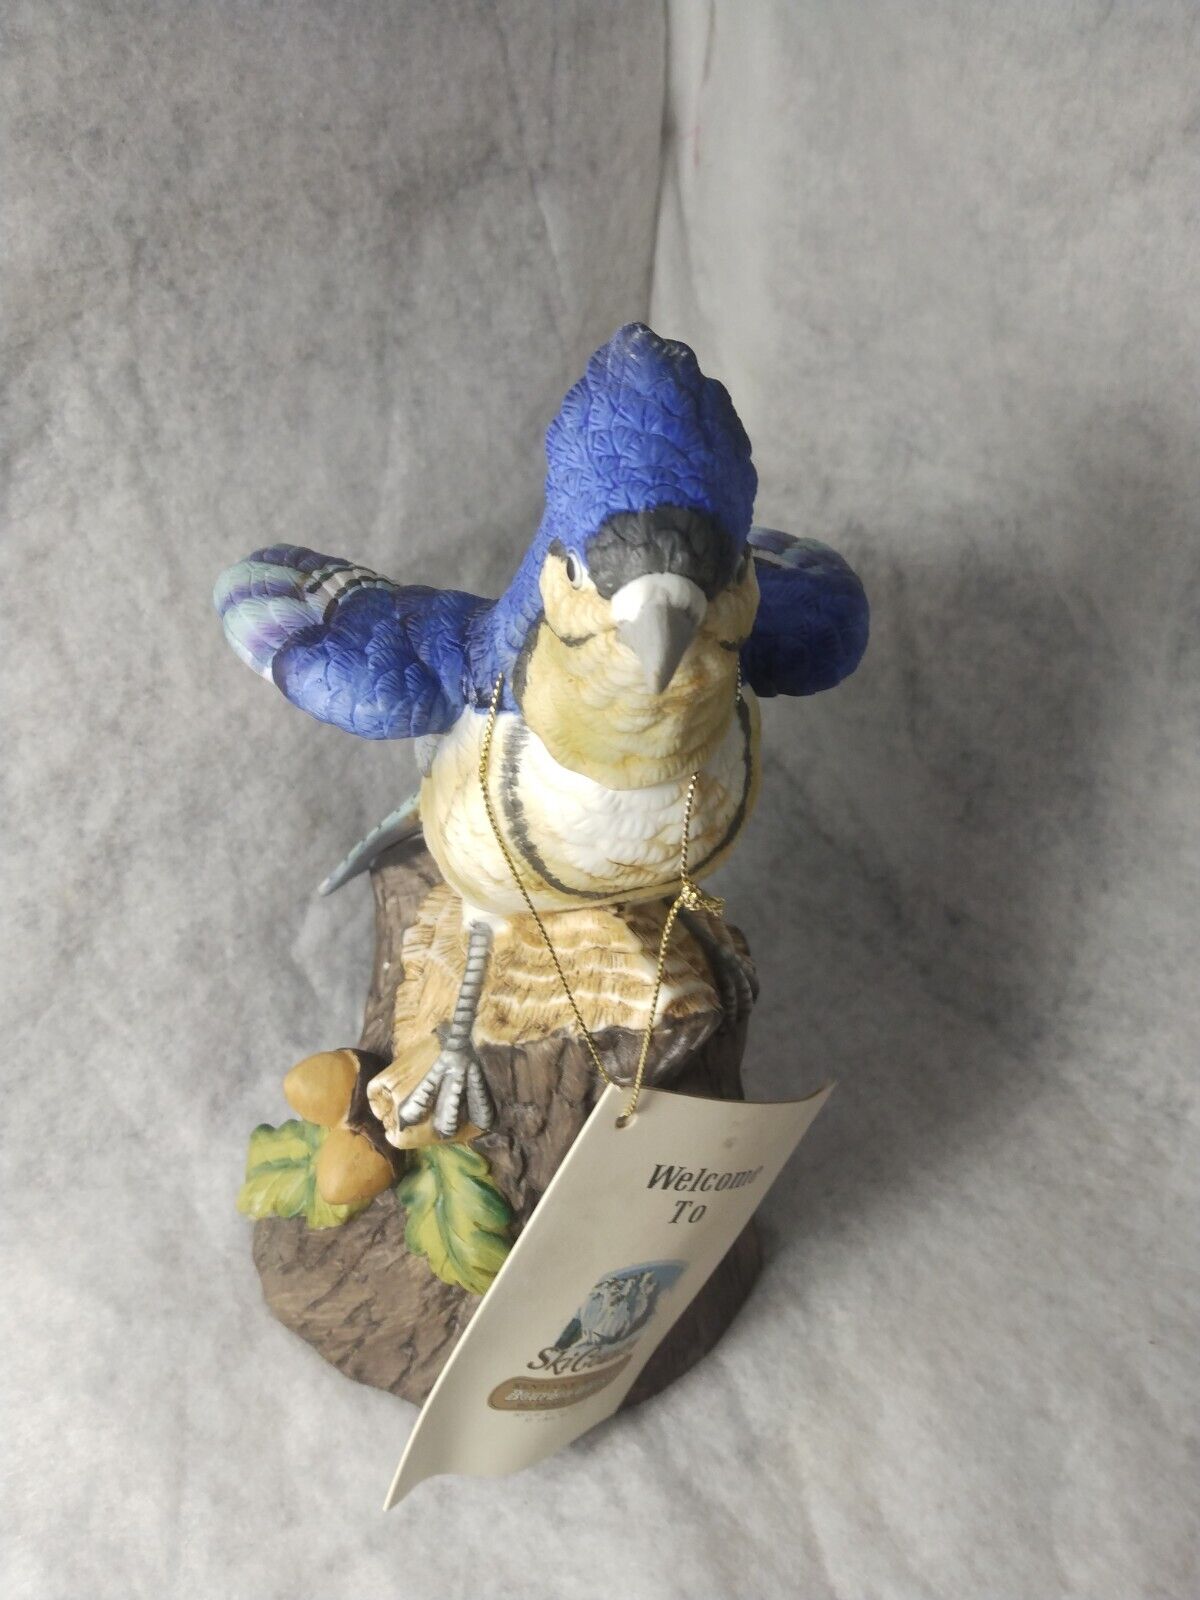 Vintage ski country 1978 full size blue jay decanter empty